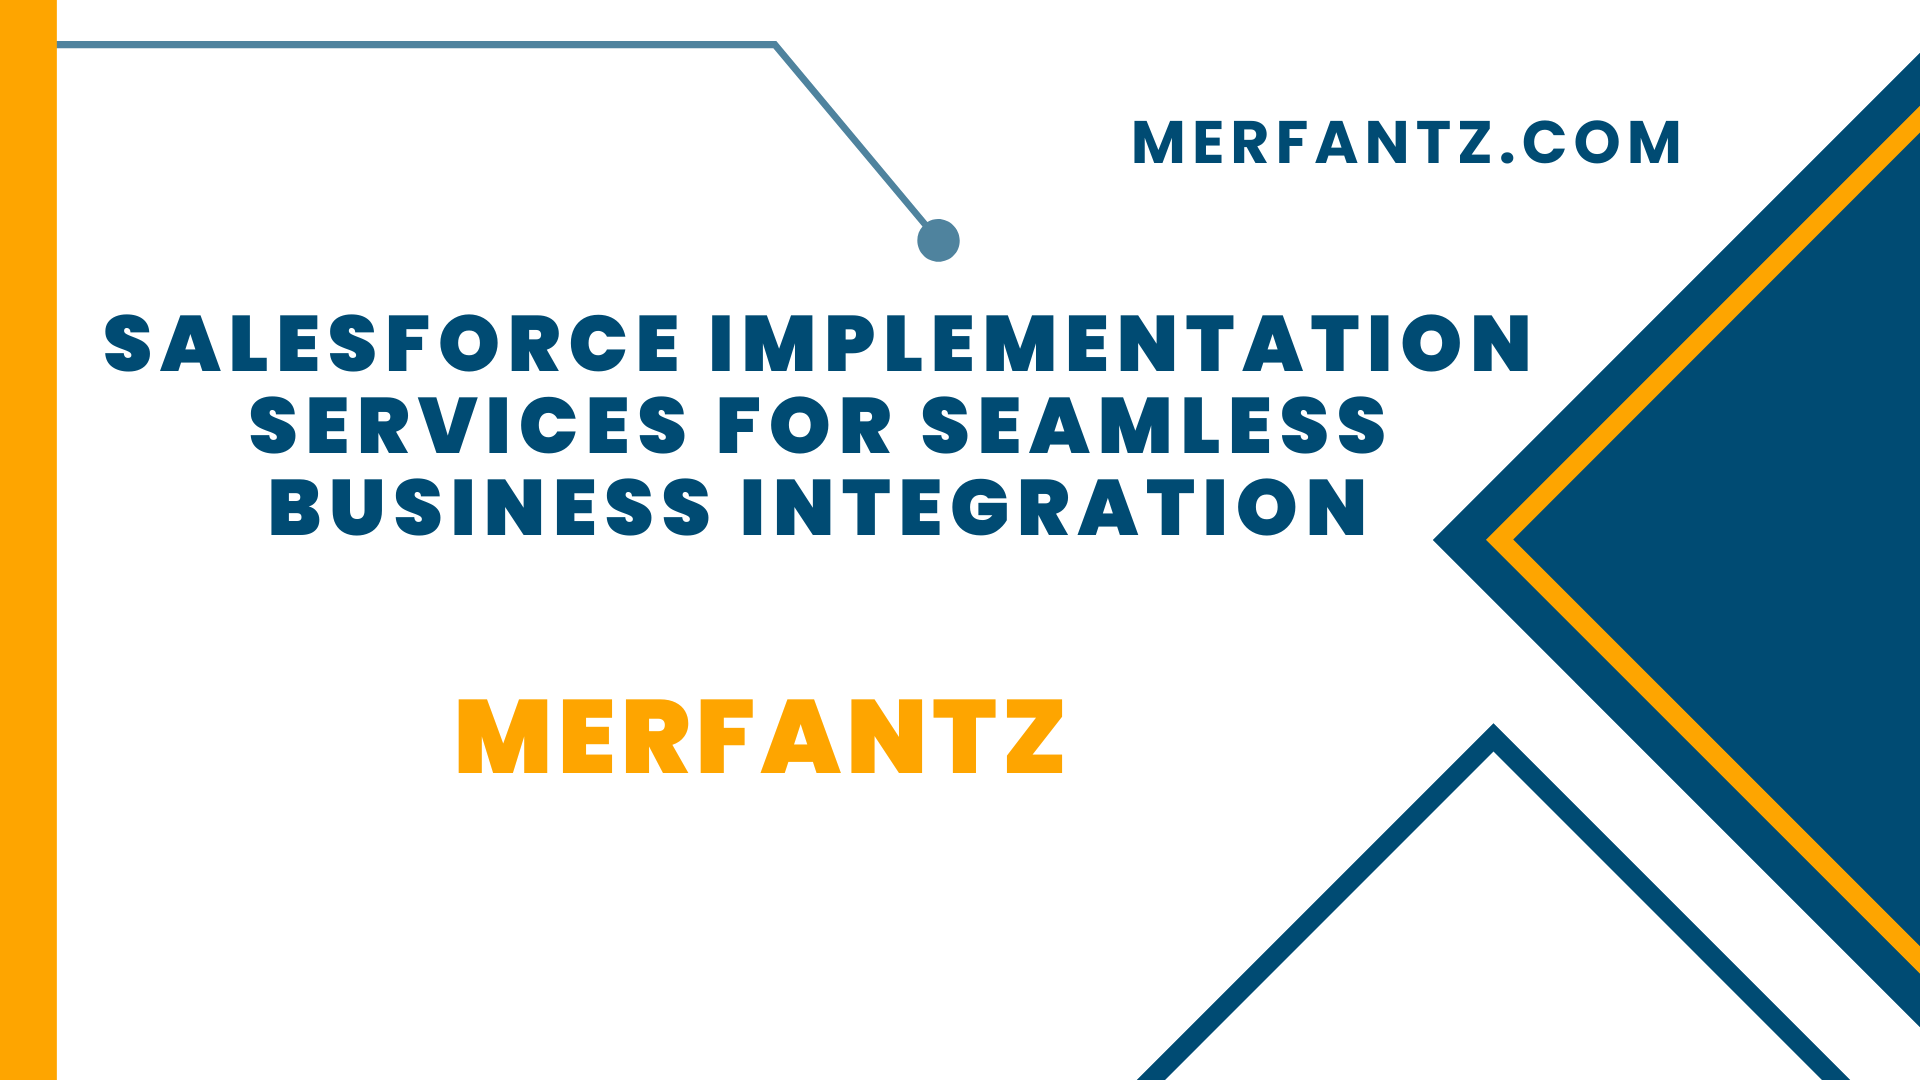 Salesforce Implementation Services for Seamless Business Integration